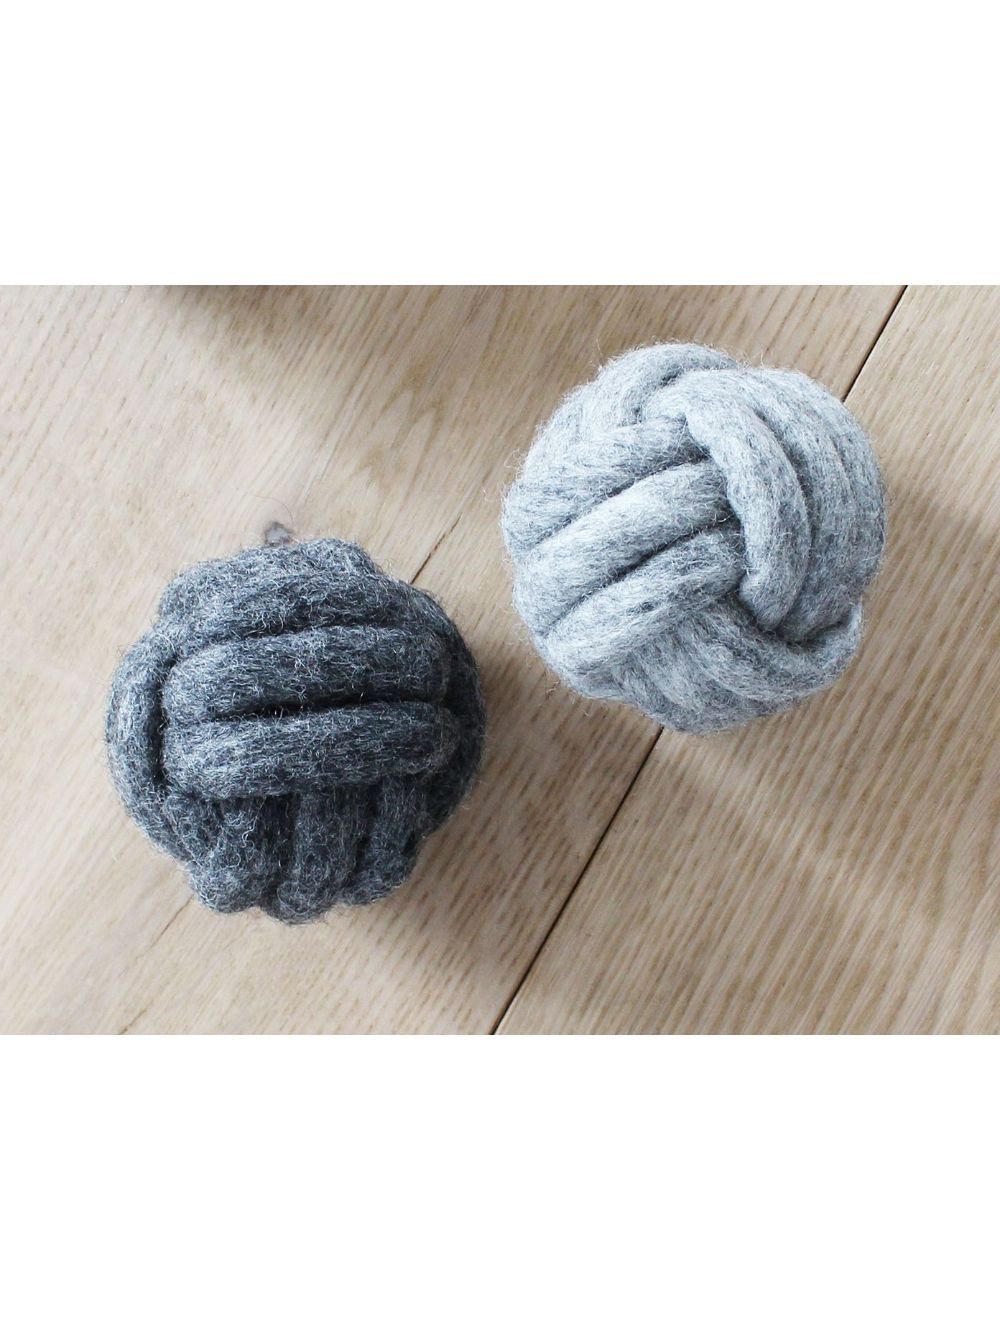 Wooldot - Knotted Dog Ball - Steel Grey - 8cm - (571400400473)